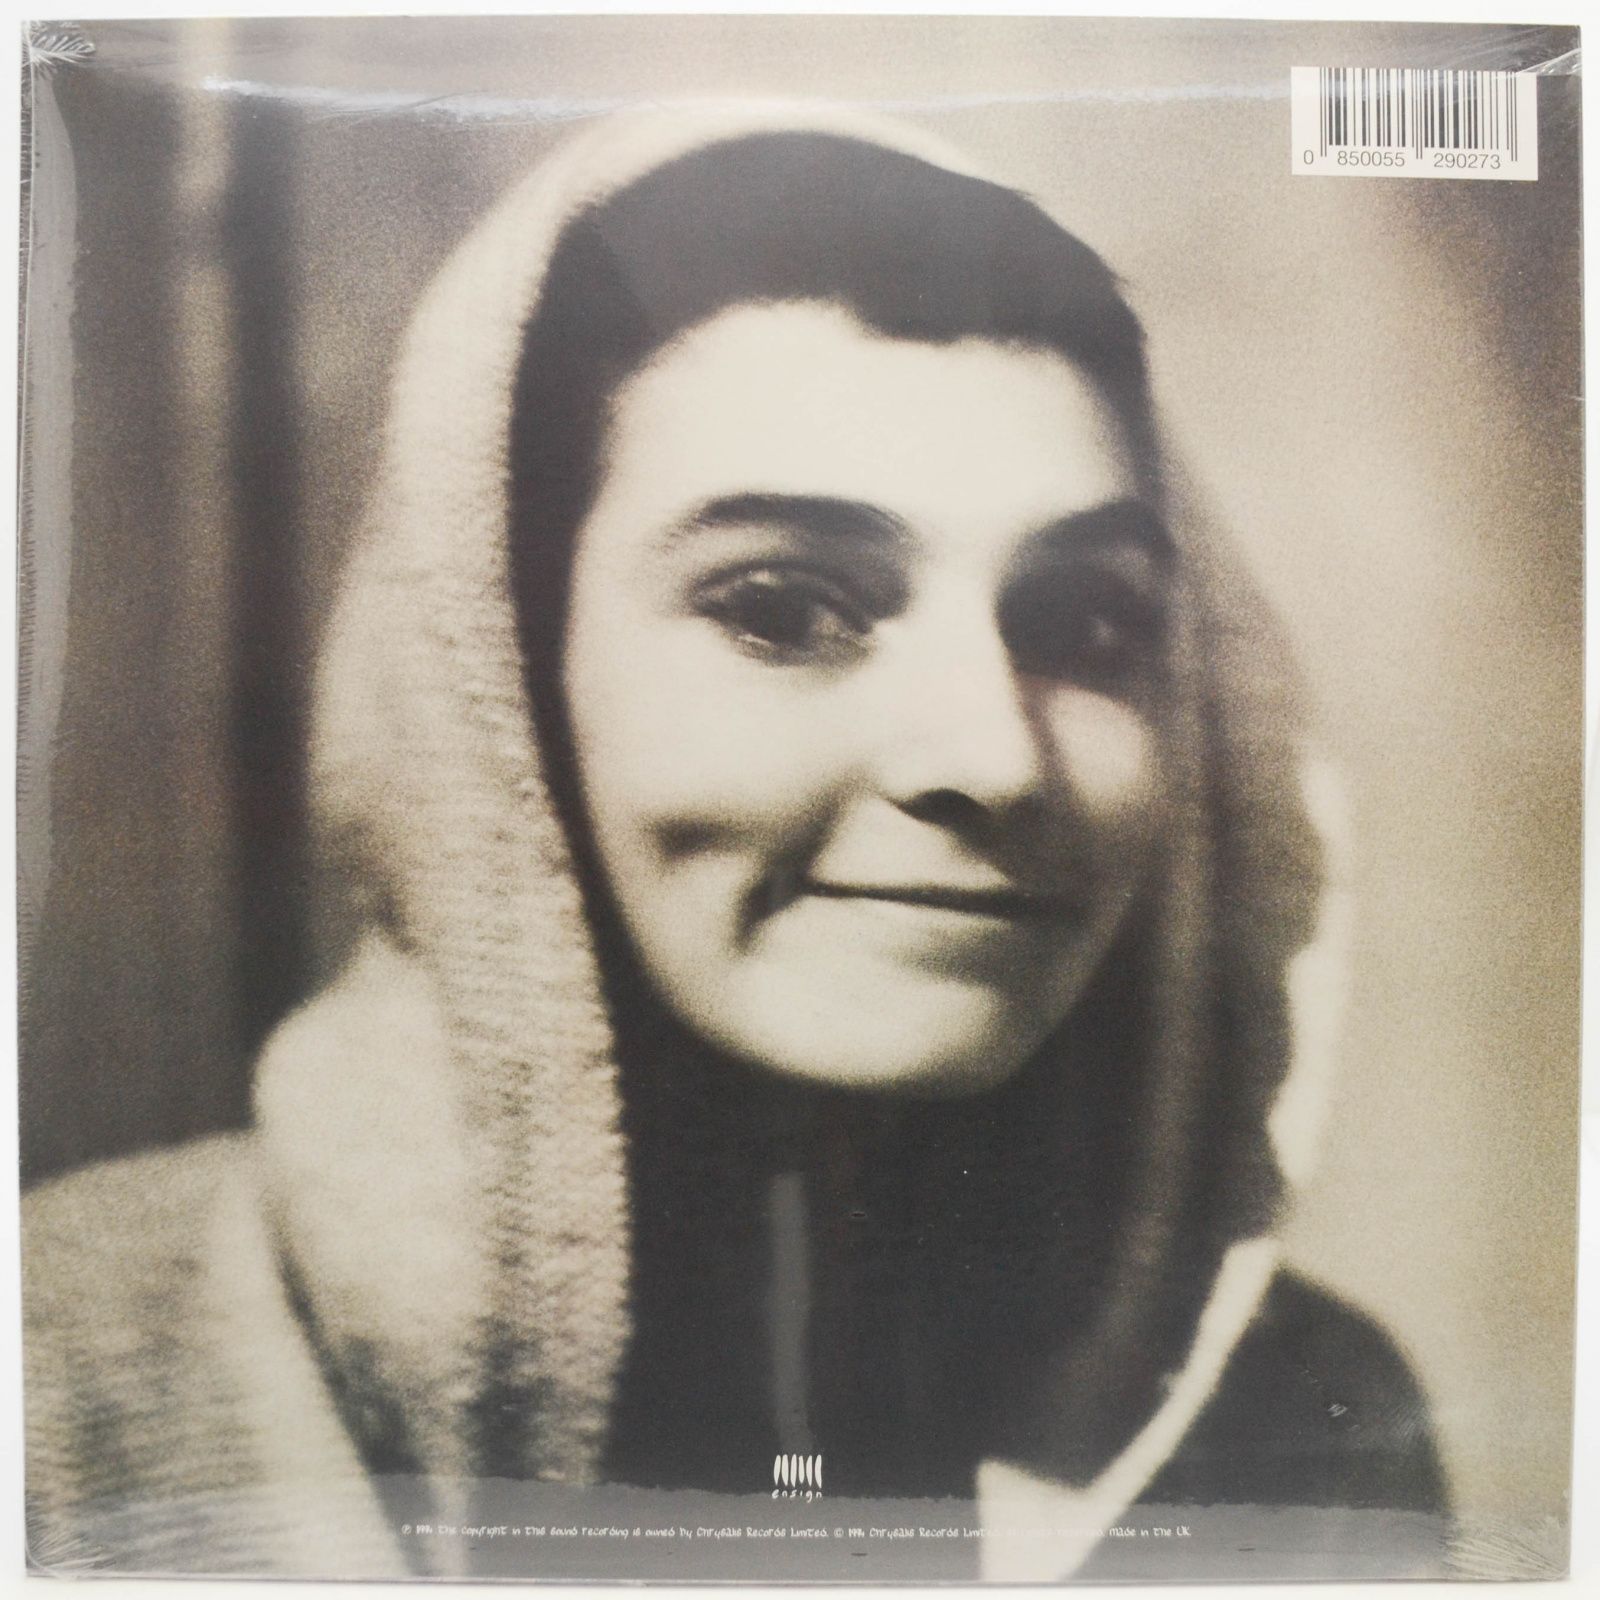 Sinéad O'Connor — Universal Mother, 1994